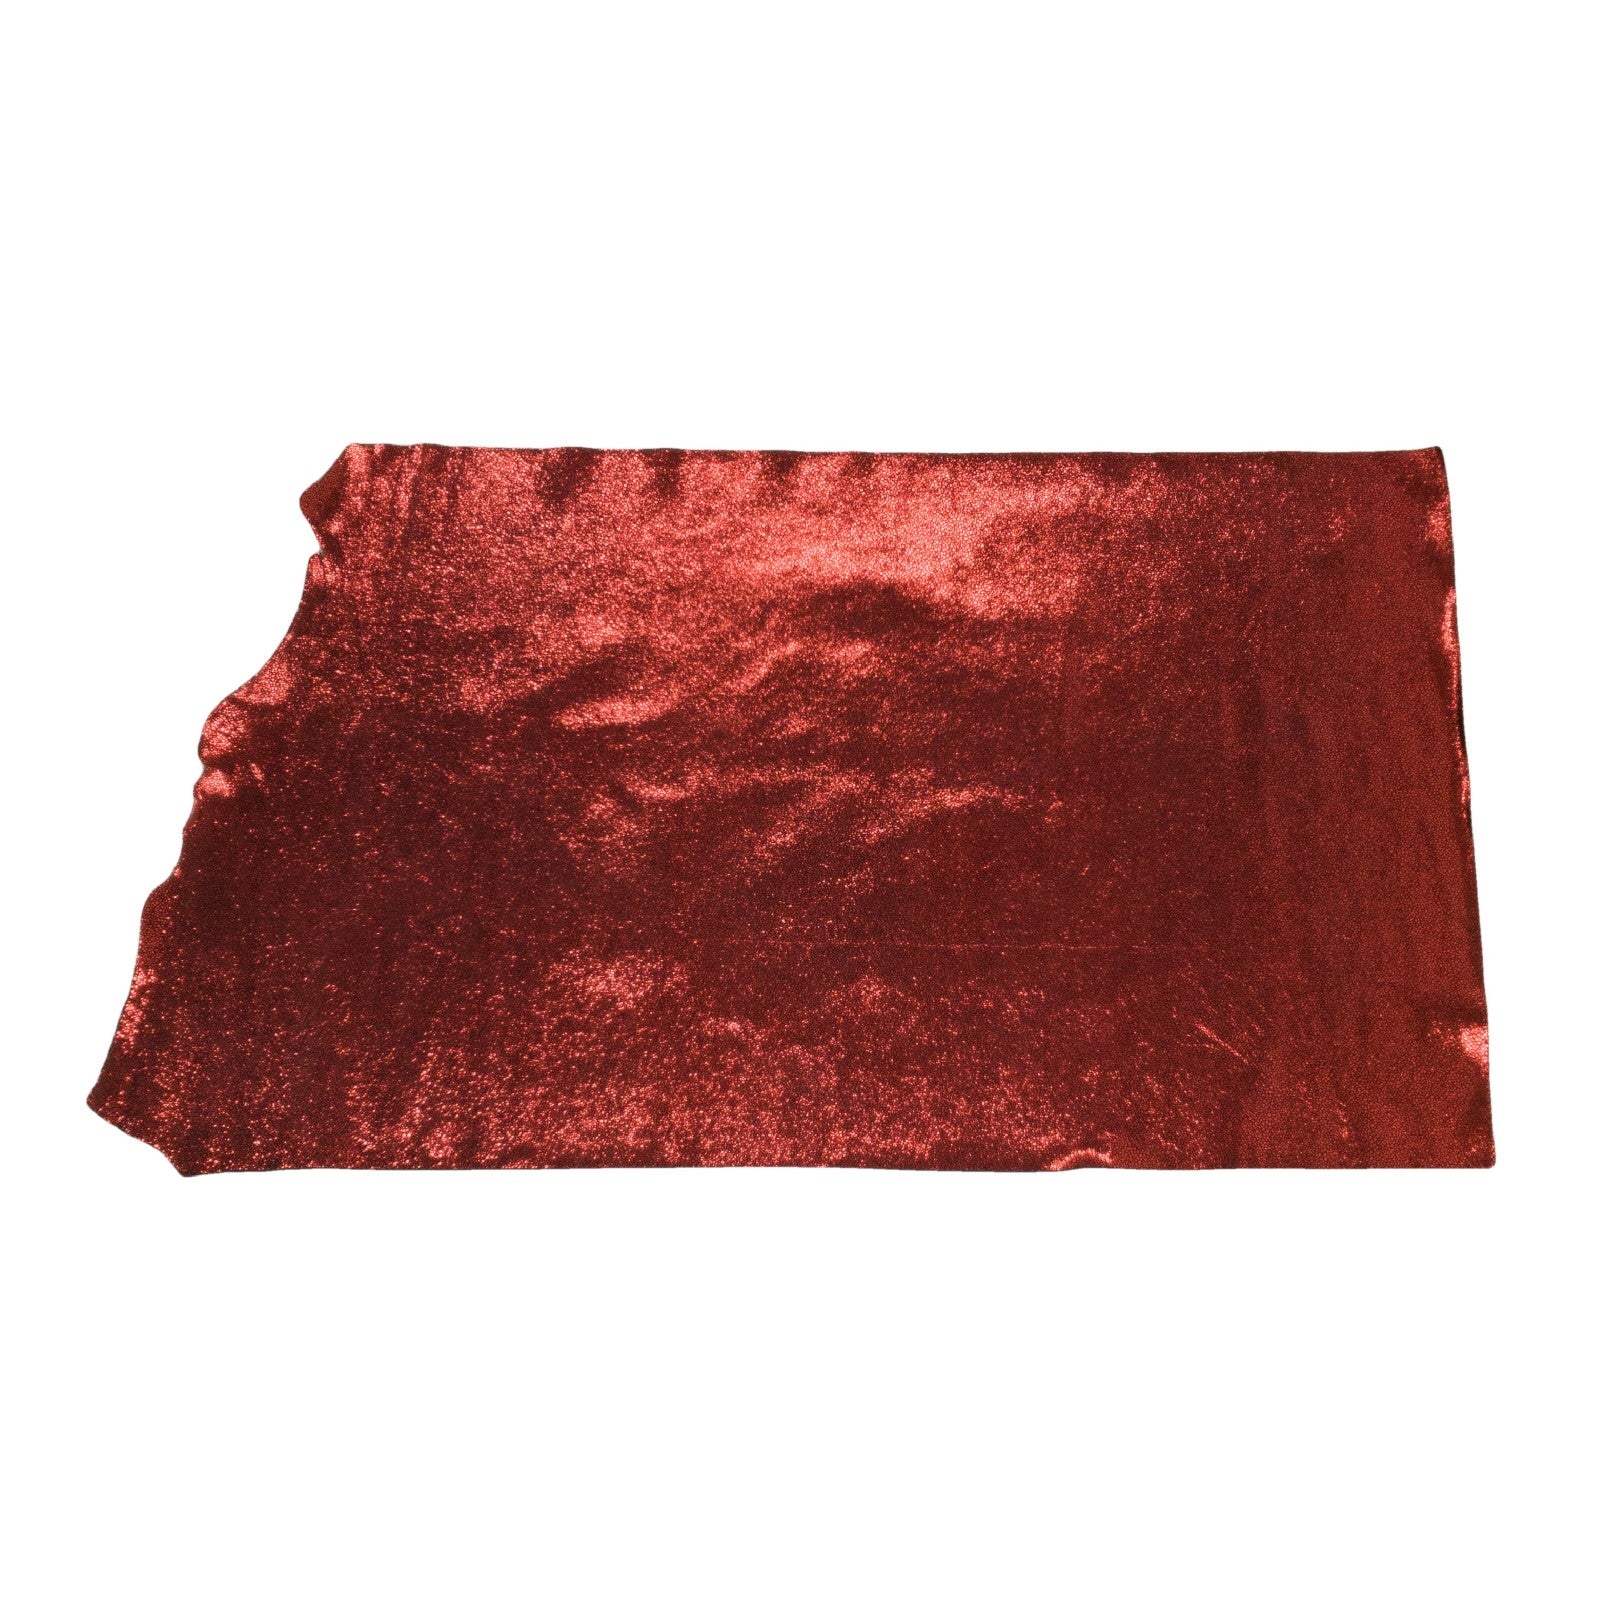 Metallic Red Sizzling Stingray 2-3 oz Cow Hides, 6.5-7.5 Sq Ft / Project Piece (Middle) | The Leather Guy